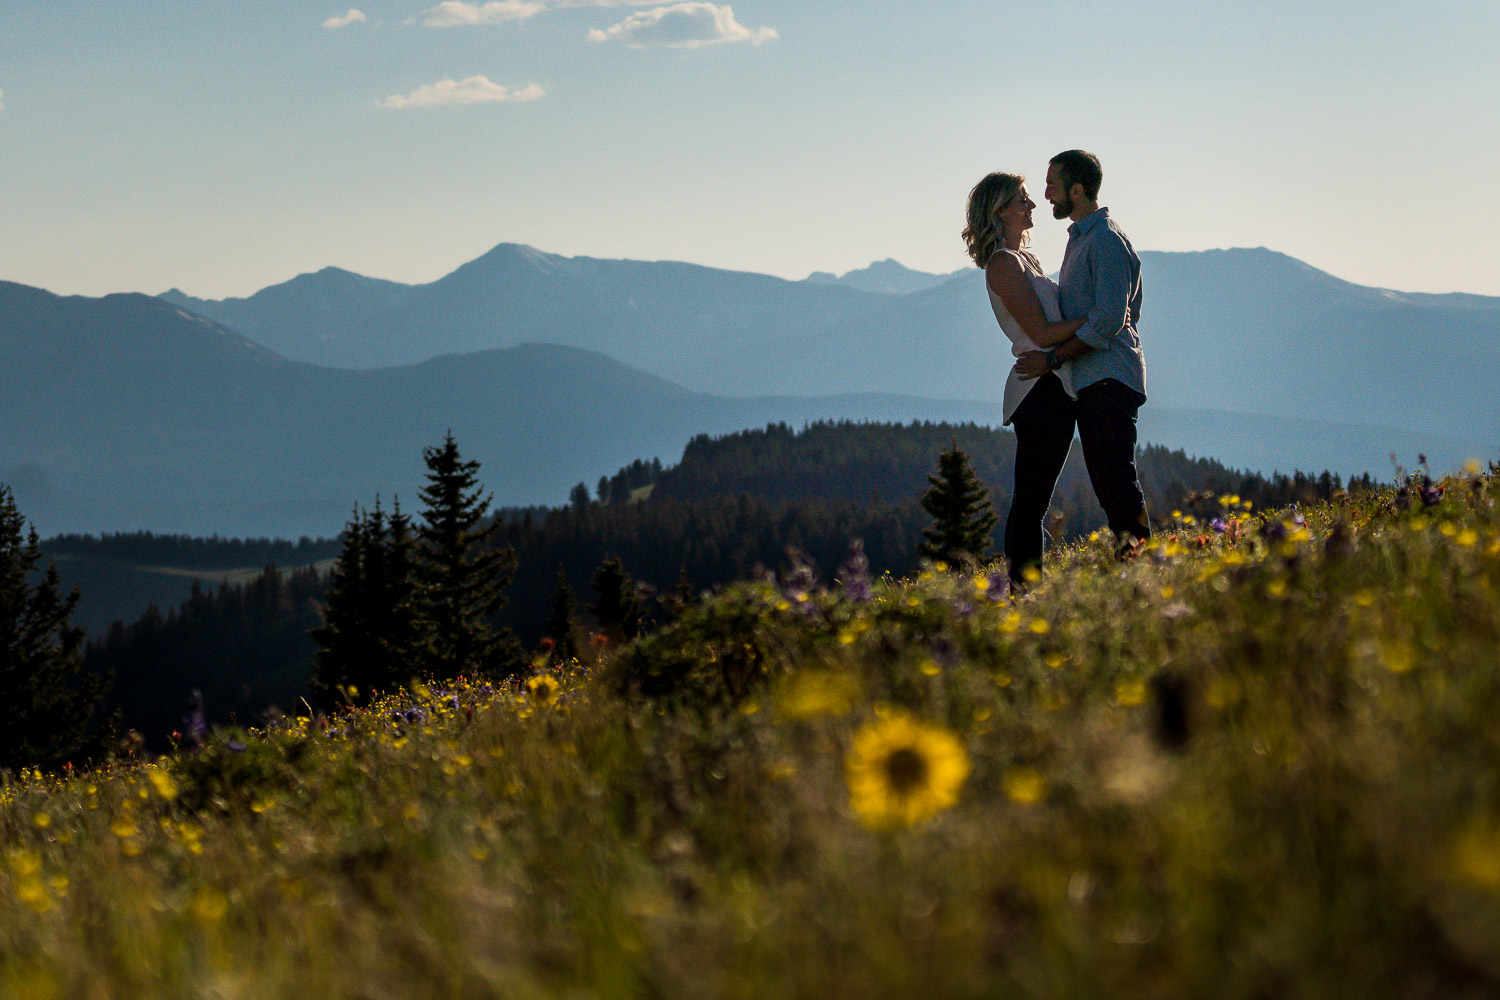 Vail Pass Engagement Photos with Wildflowers